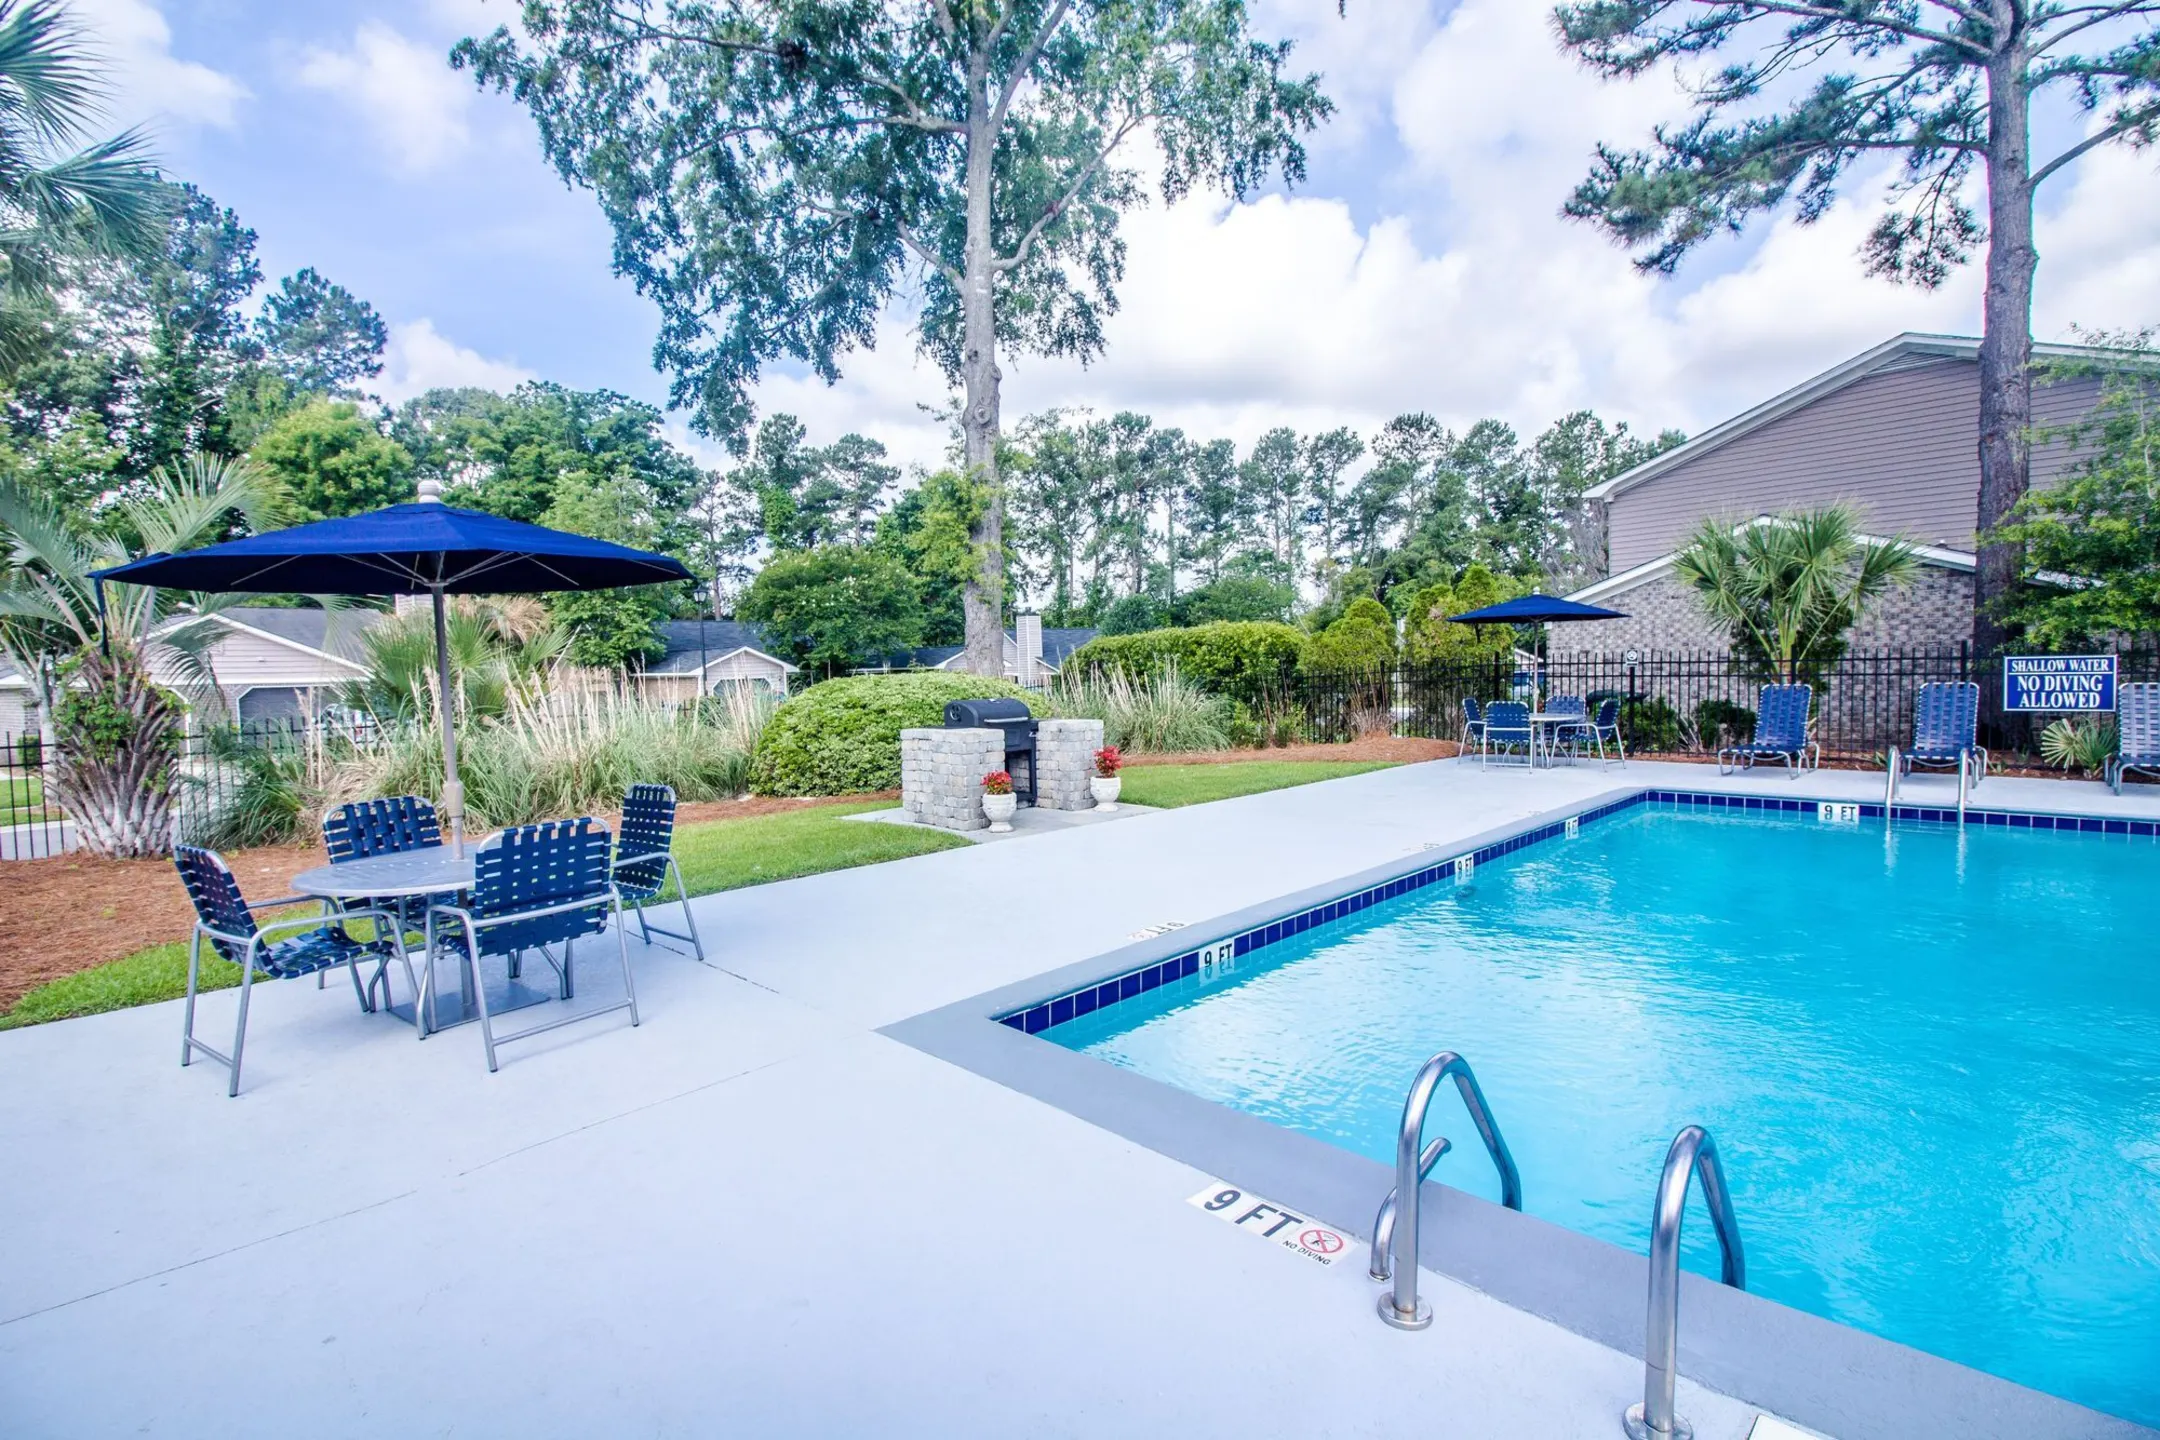 Pool - The Cottages At Crowfield - Ladson, SC